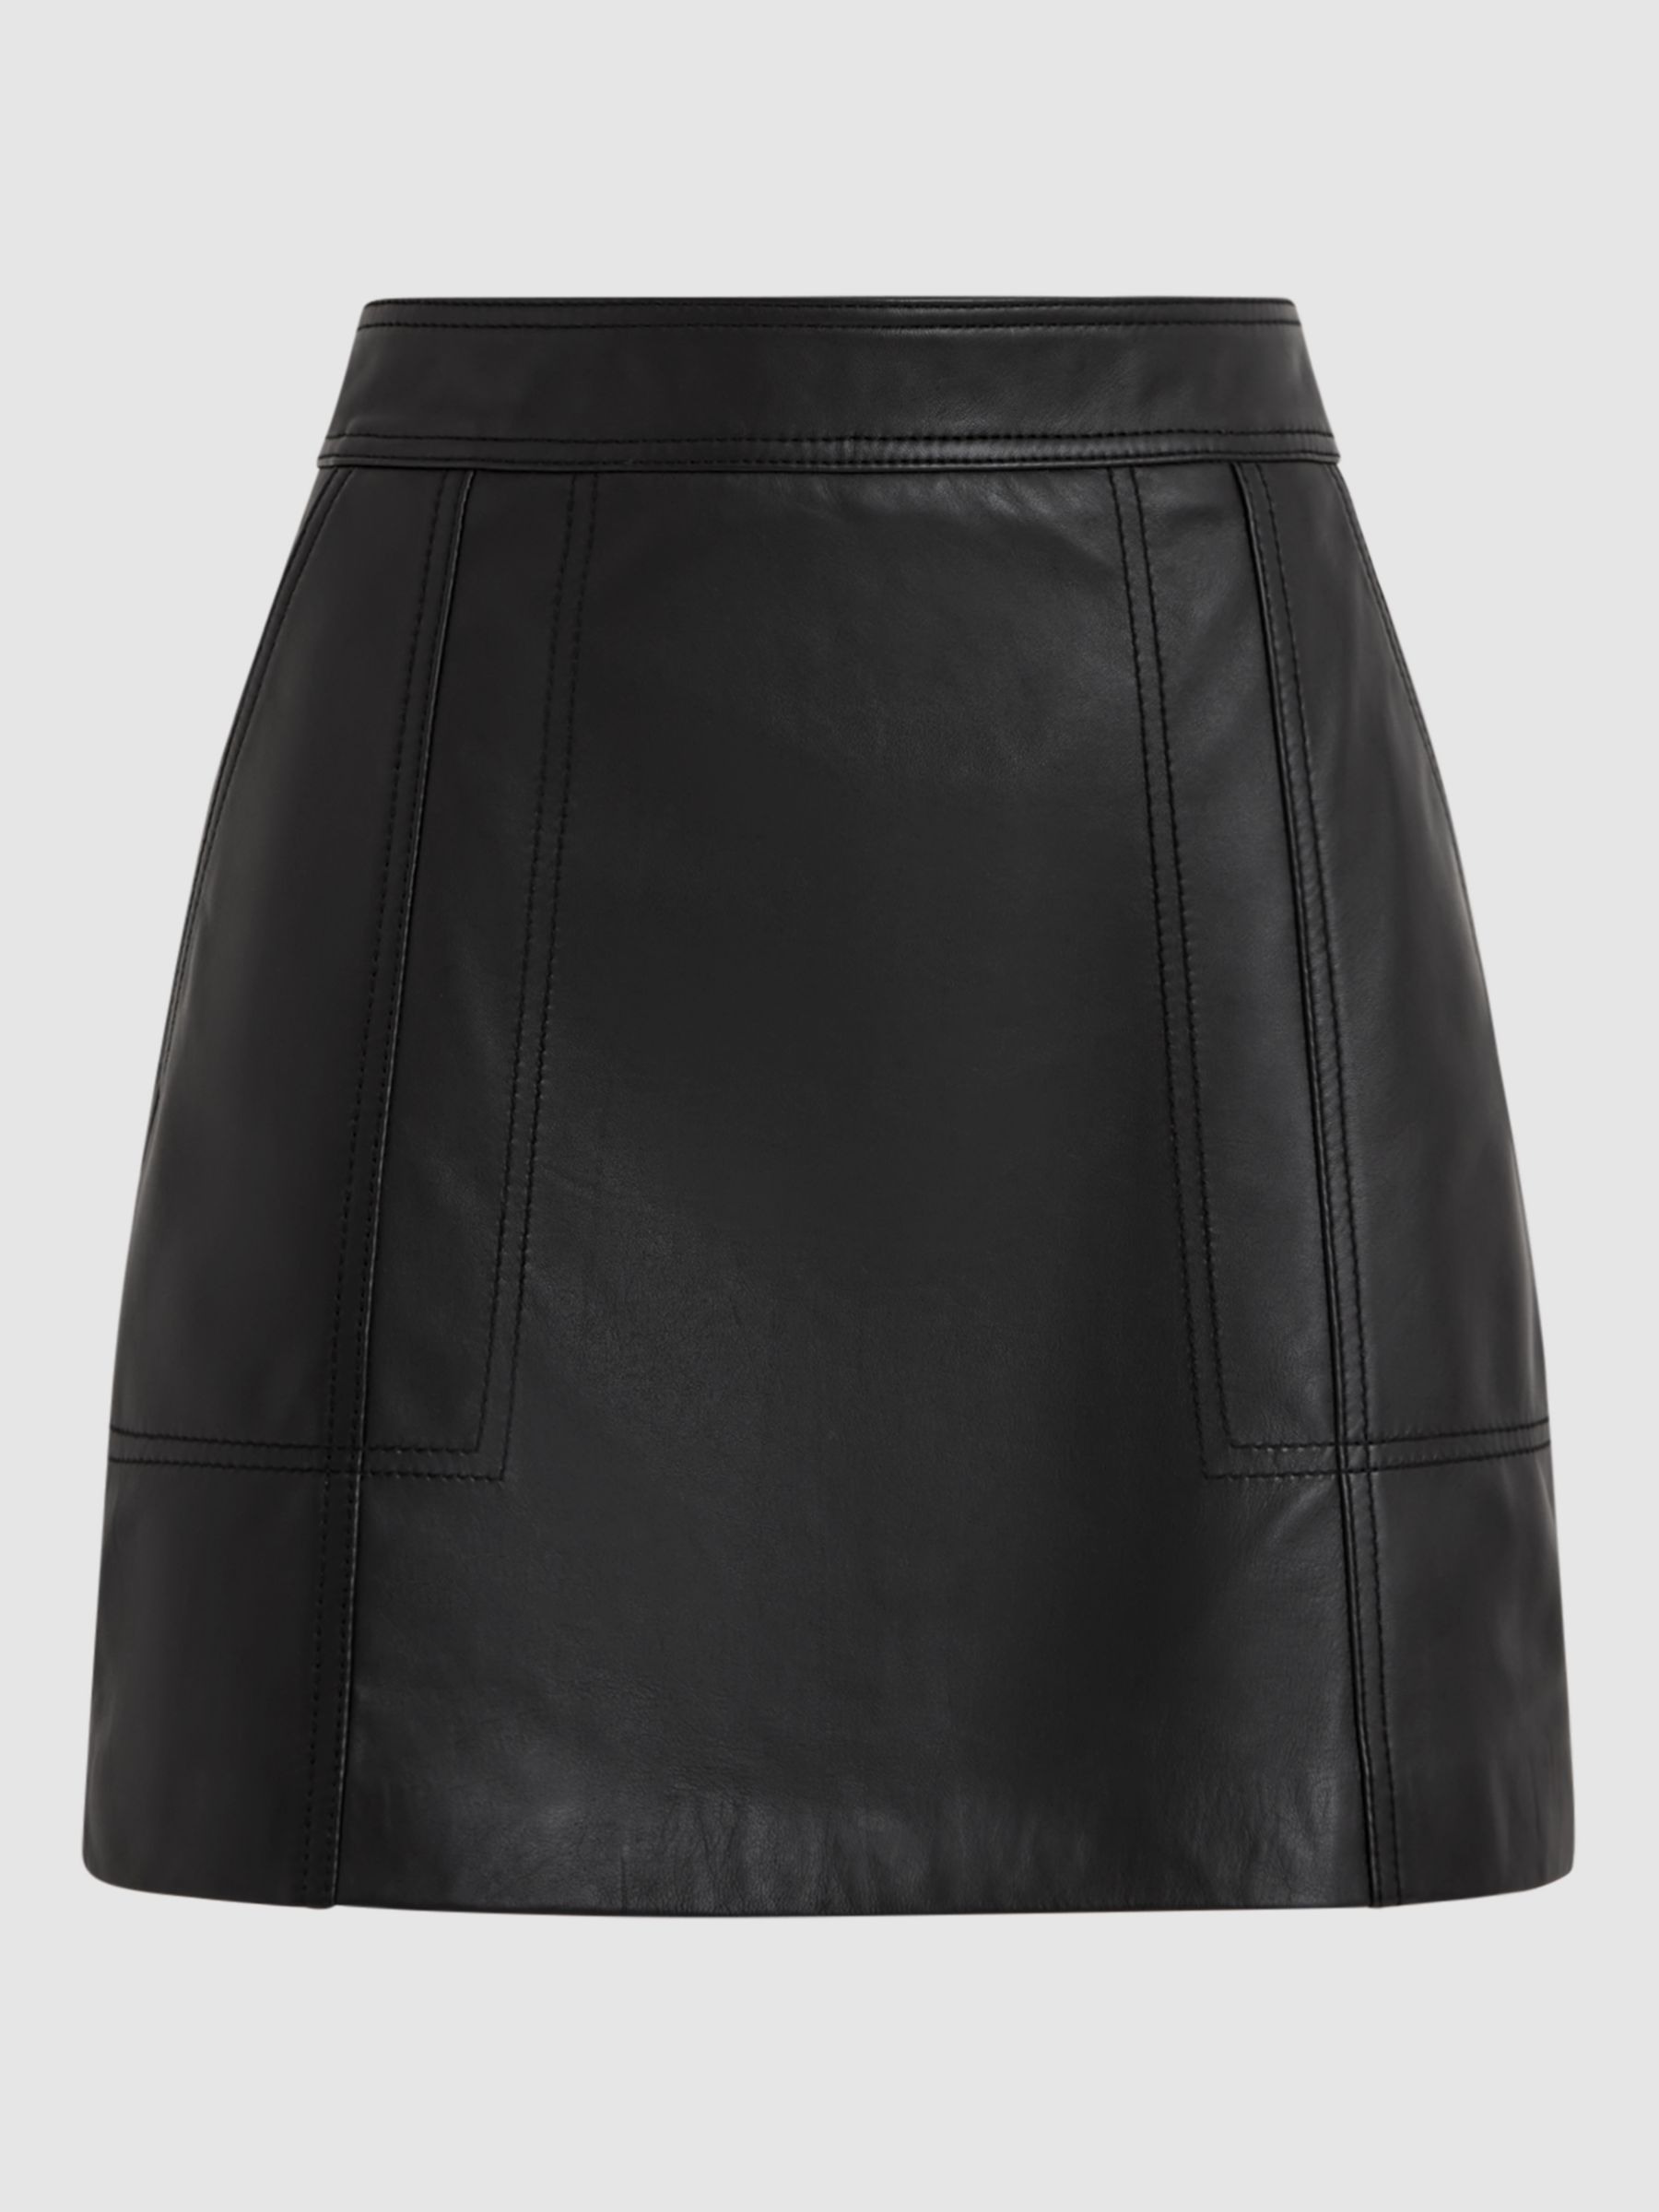 Buy Reiss Edie High Waisted Leather Mini Skirt, Black Online at johnlewis.com